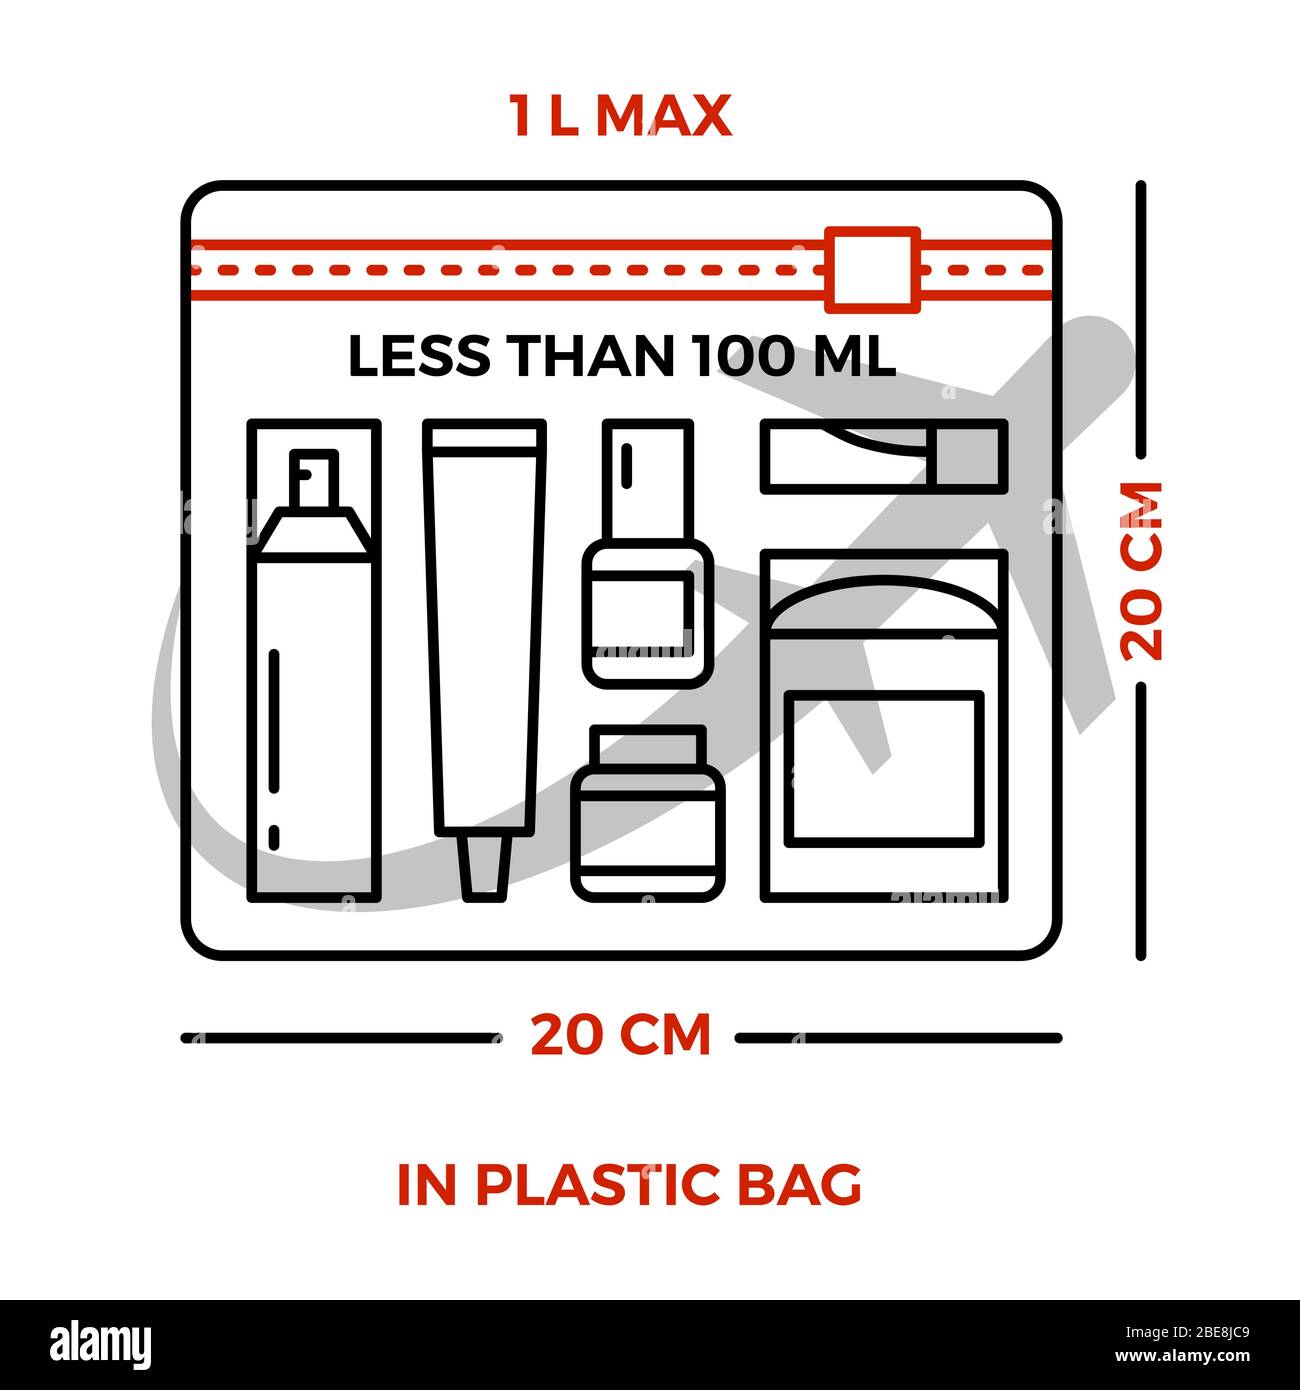 Airport rules for liquids on luggage - line information poster. Vector illustration Stock Vector